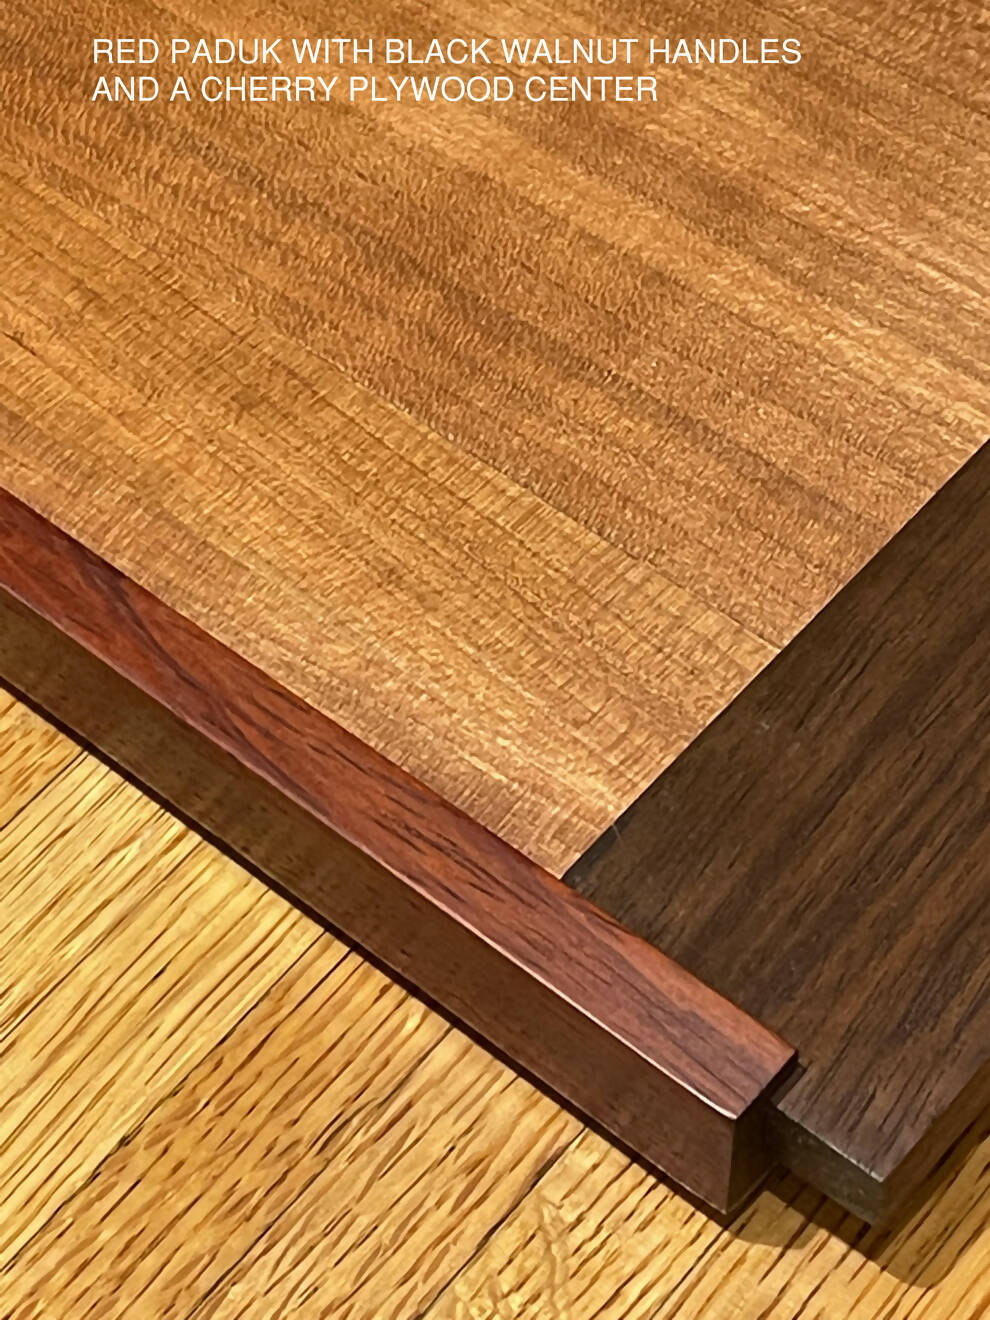 Serving Tray Floating Edge Series - Lacewood and Walnut